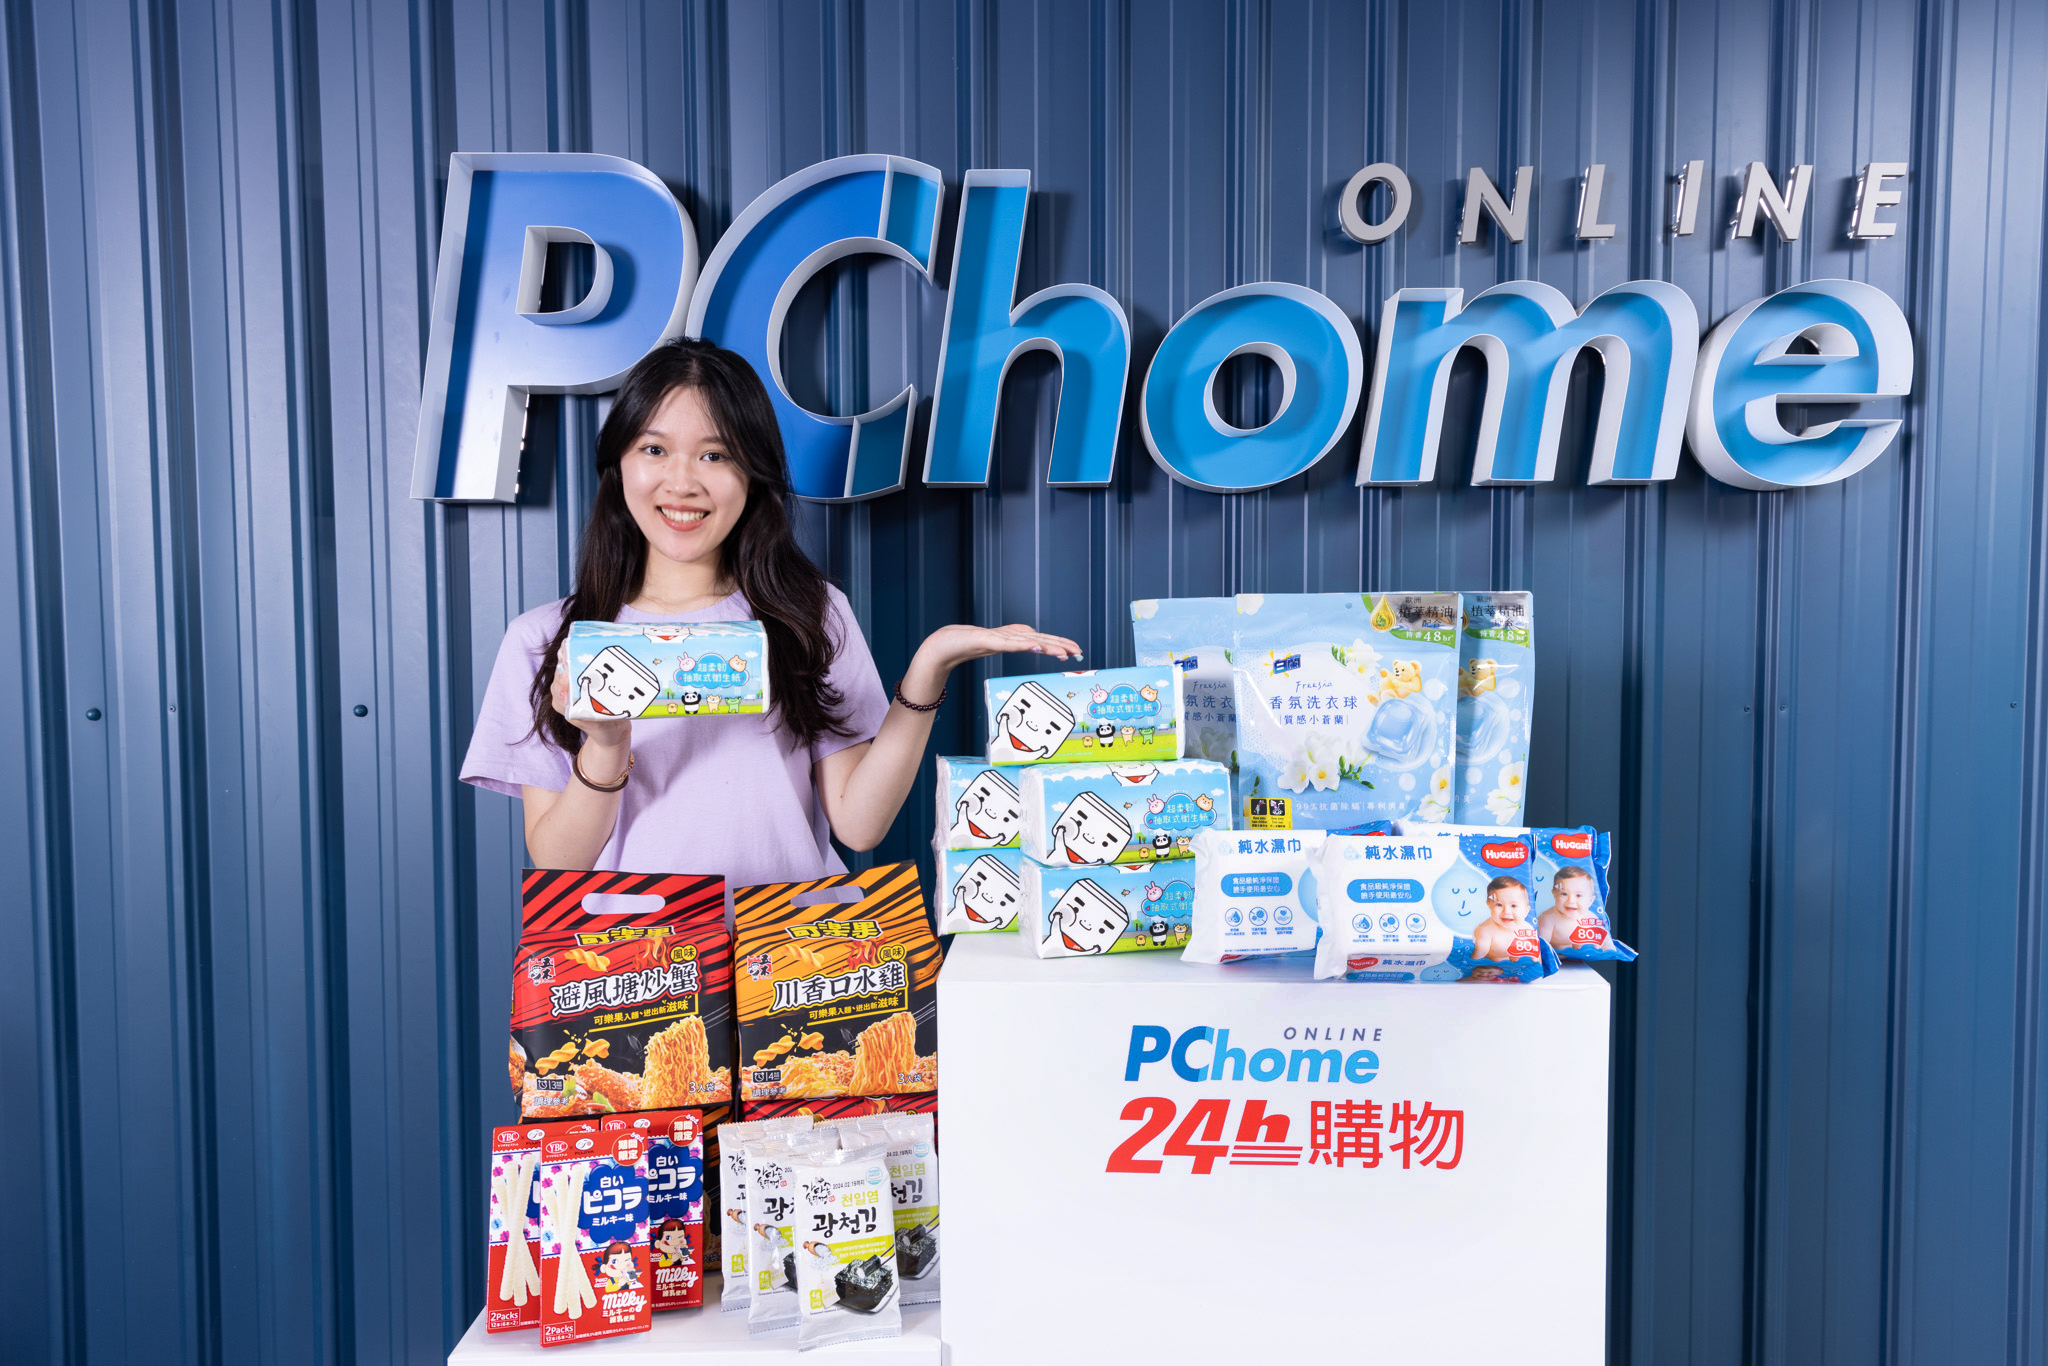 Sales of Card Readers at PChome 24h Shopping Doubles in the First Half of the Month A Complete Guide to Saving Money Strategy for the Tax-Filing Season